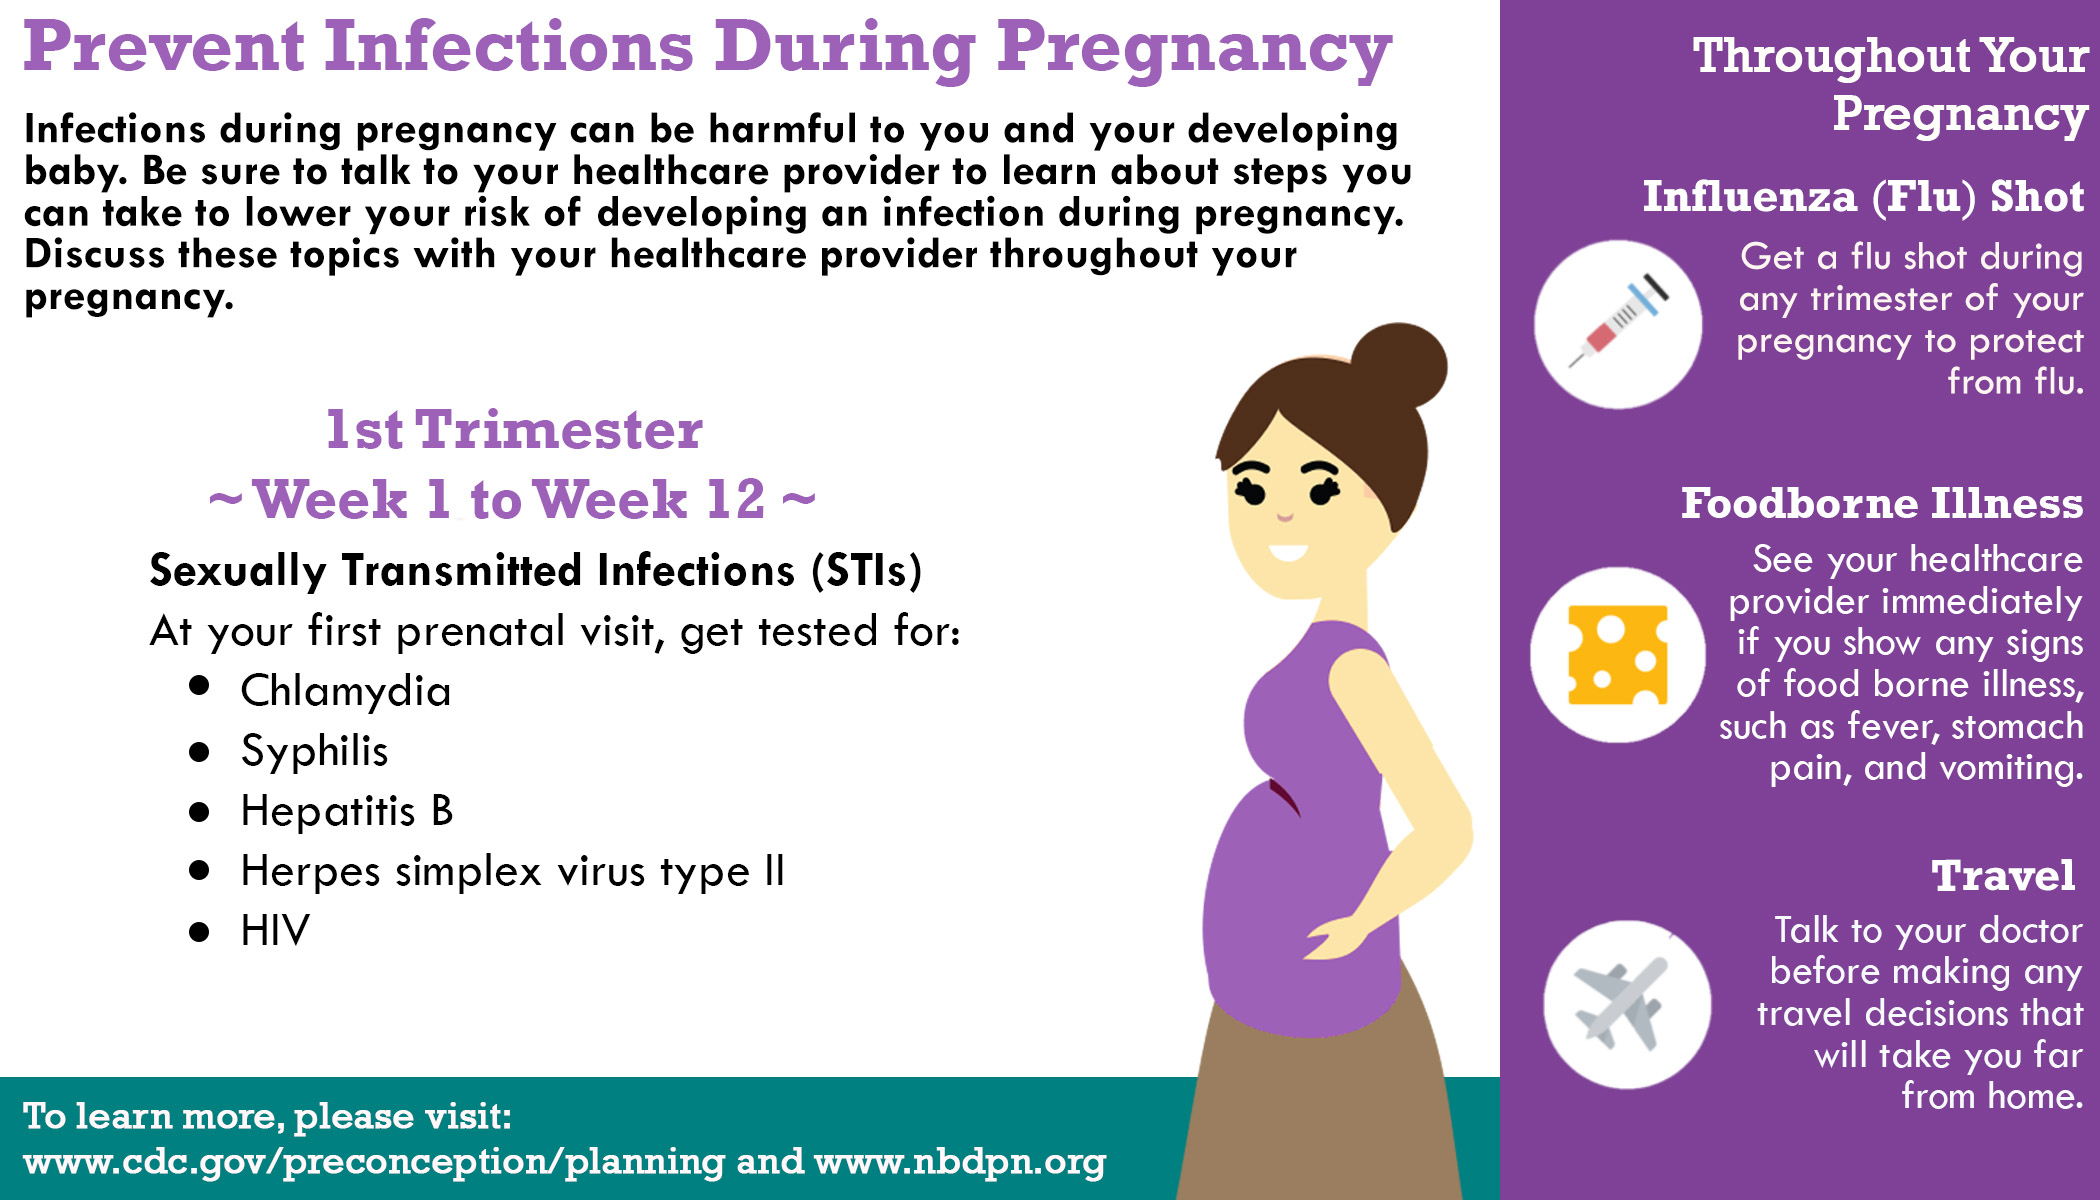 National Birth Defects Prevention Month - National Birth Defects